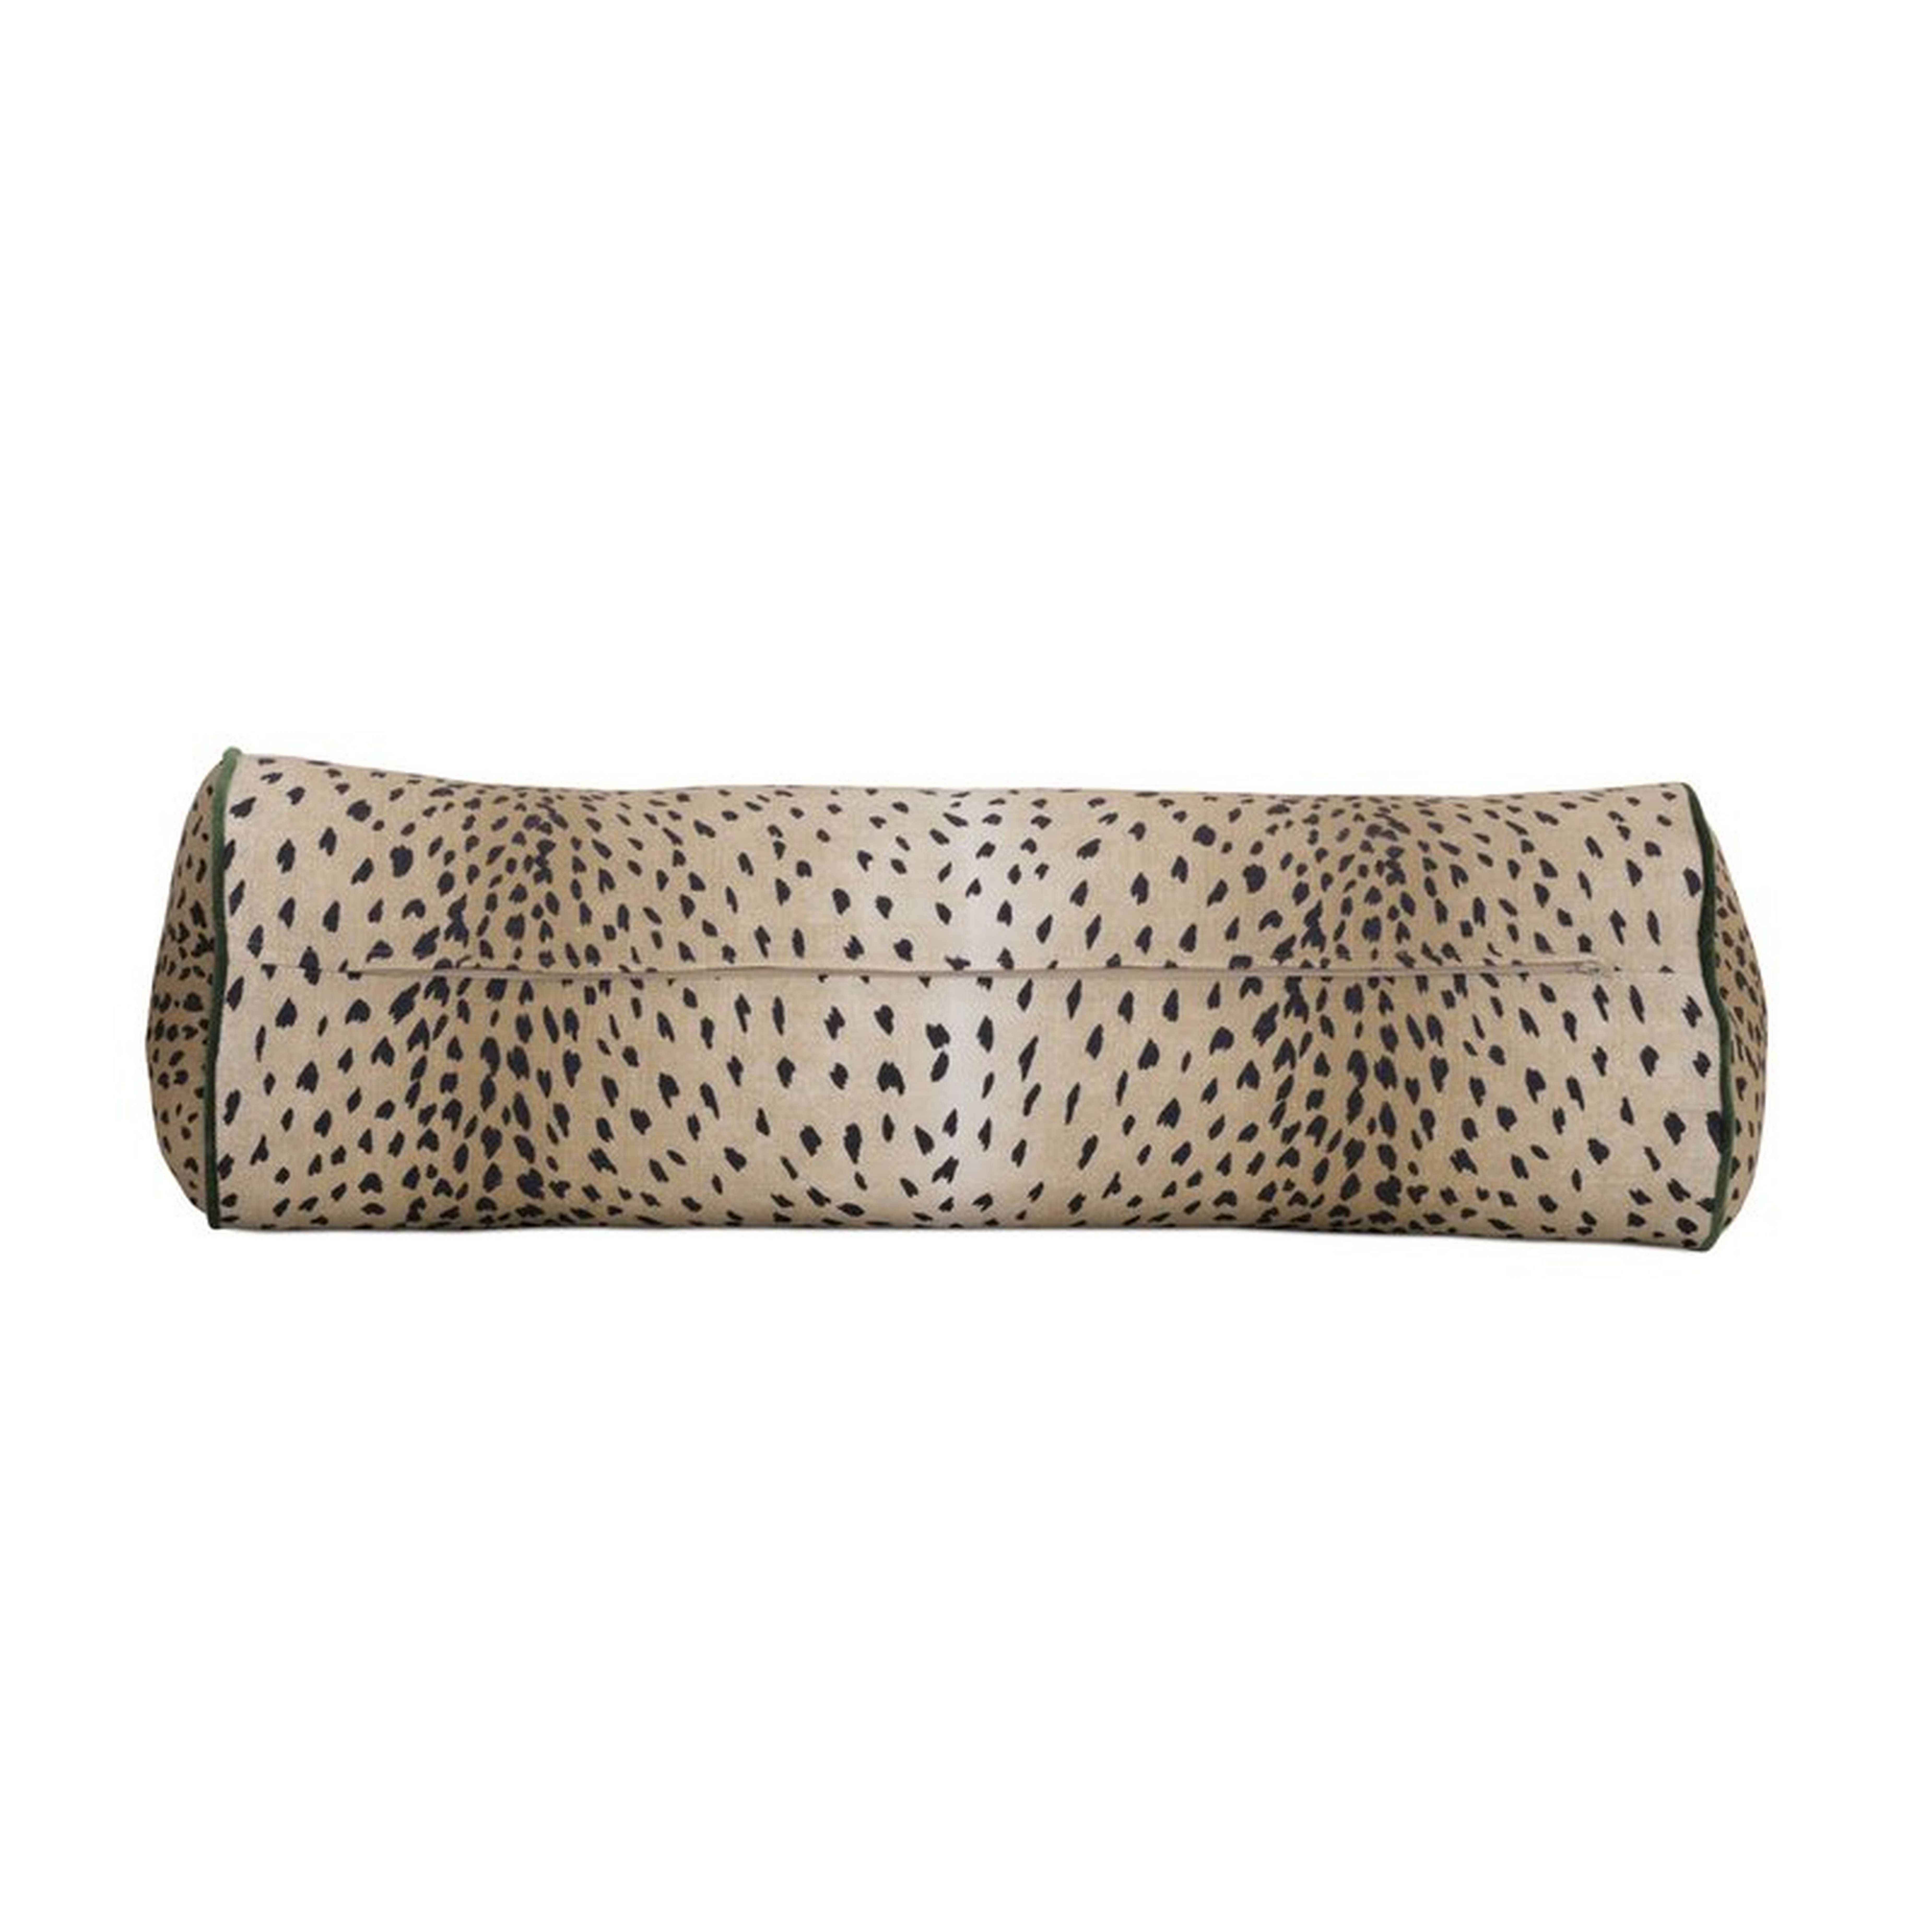 Eastern Accents Inès Spotted Animal Print Bolster Pillow - Perigold